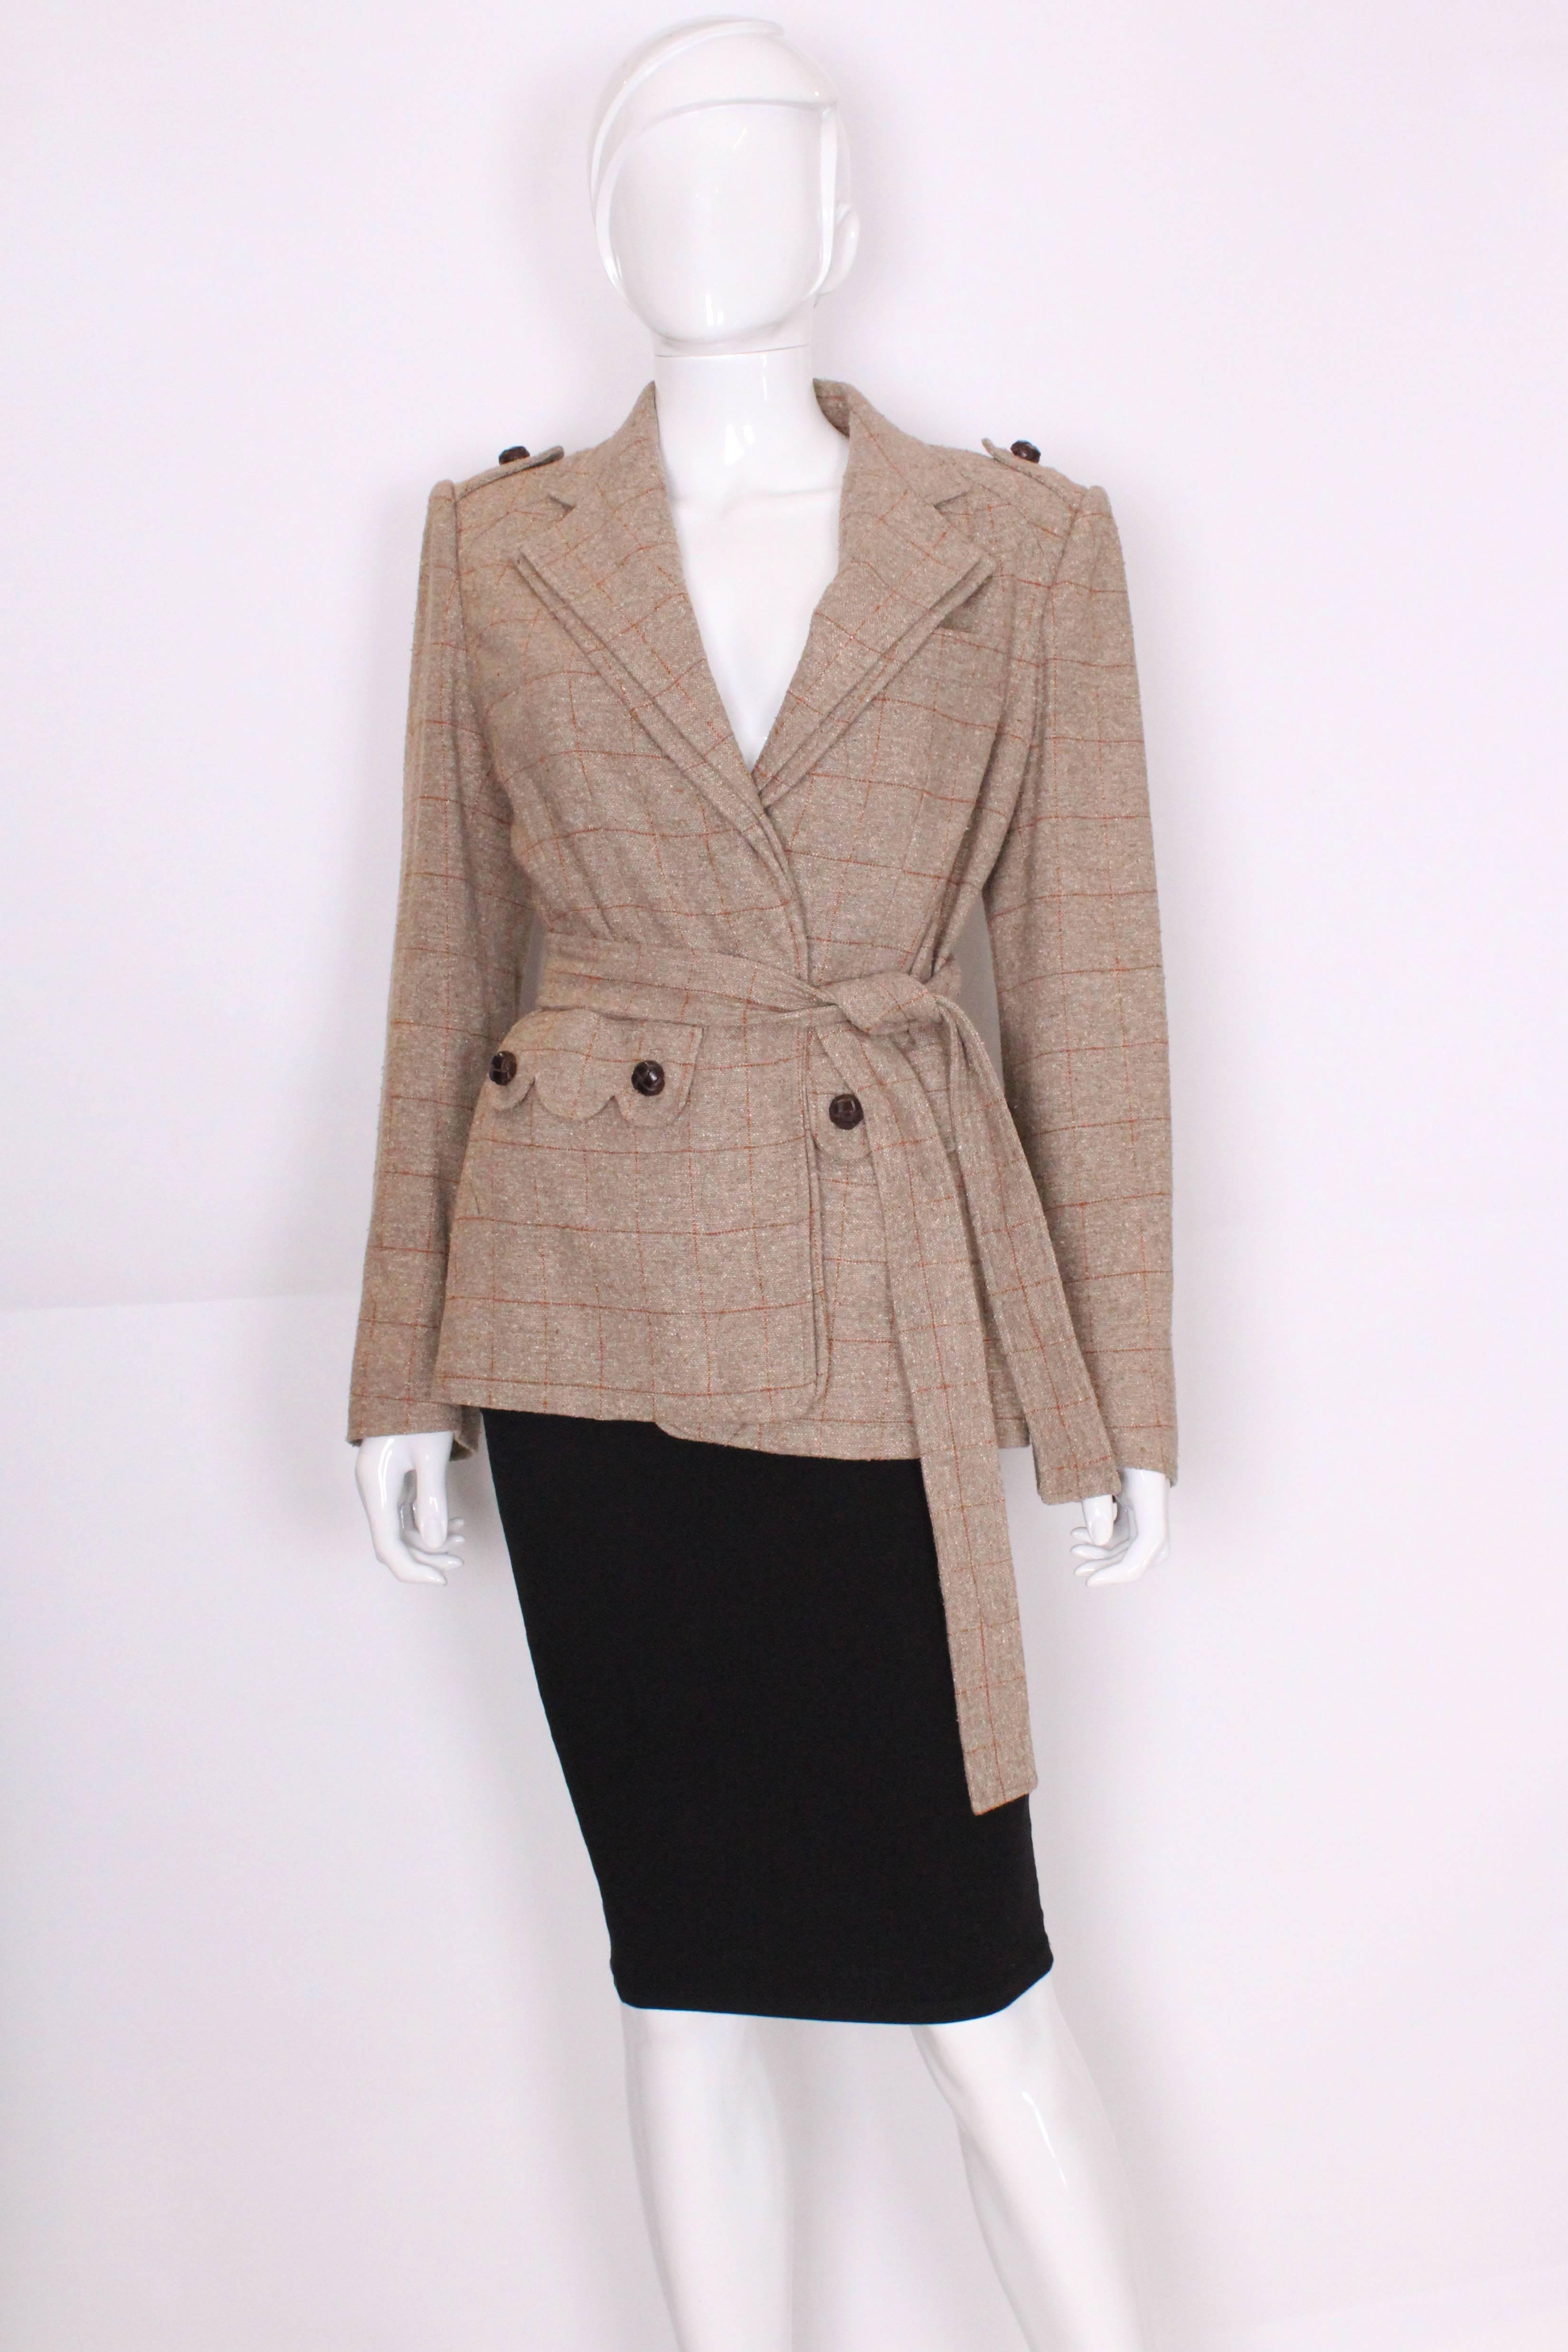 A great jacket for Fall from Yves Saint Laurent, Rive Gauche .The jacket is in a silk/linen mix, in a light brown speckled fabric with tan lines.It has one breast pocket on the left hand side and two pockets at waist level. The buttons are covered